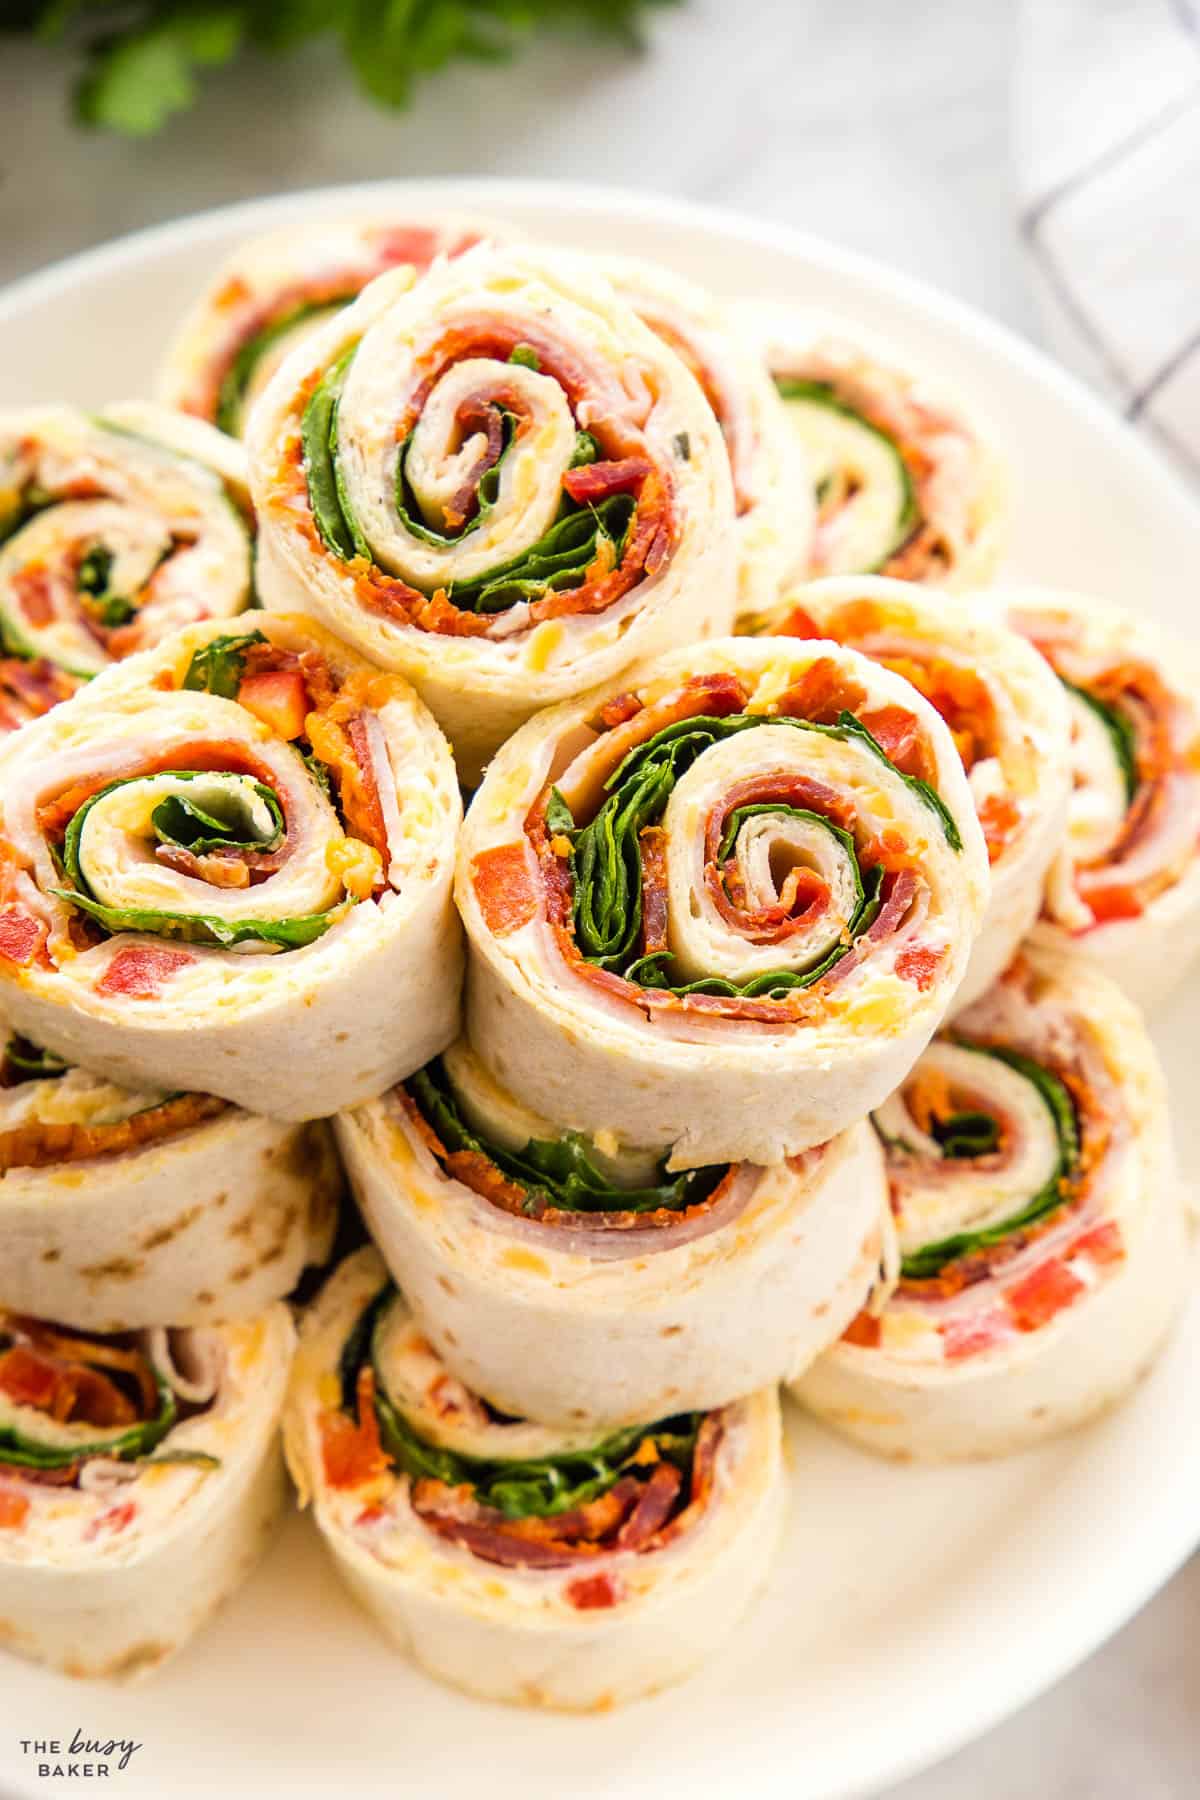 pinwheel sandwiches with turkey, spinach and cheese